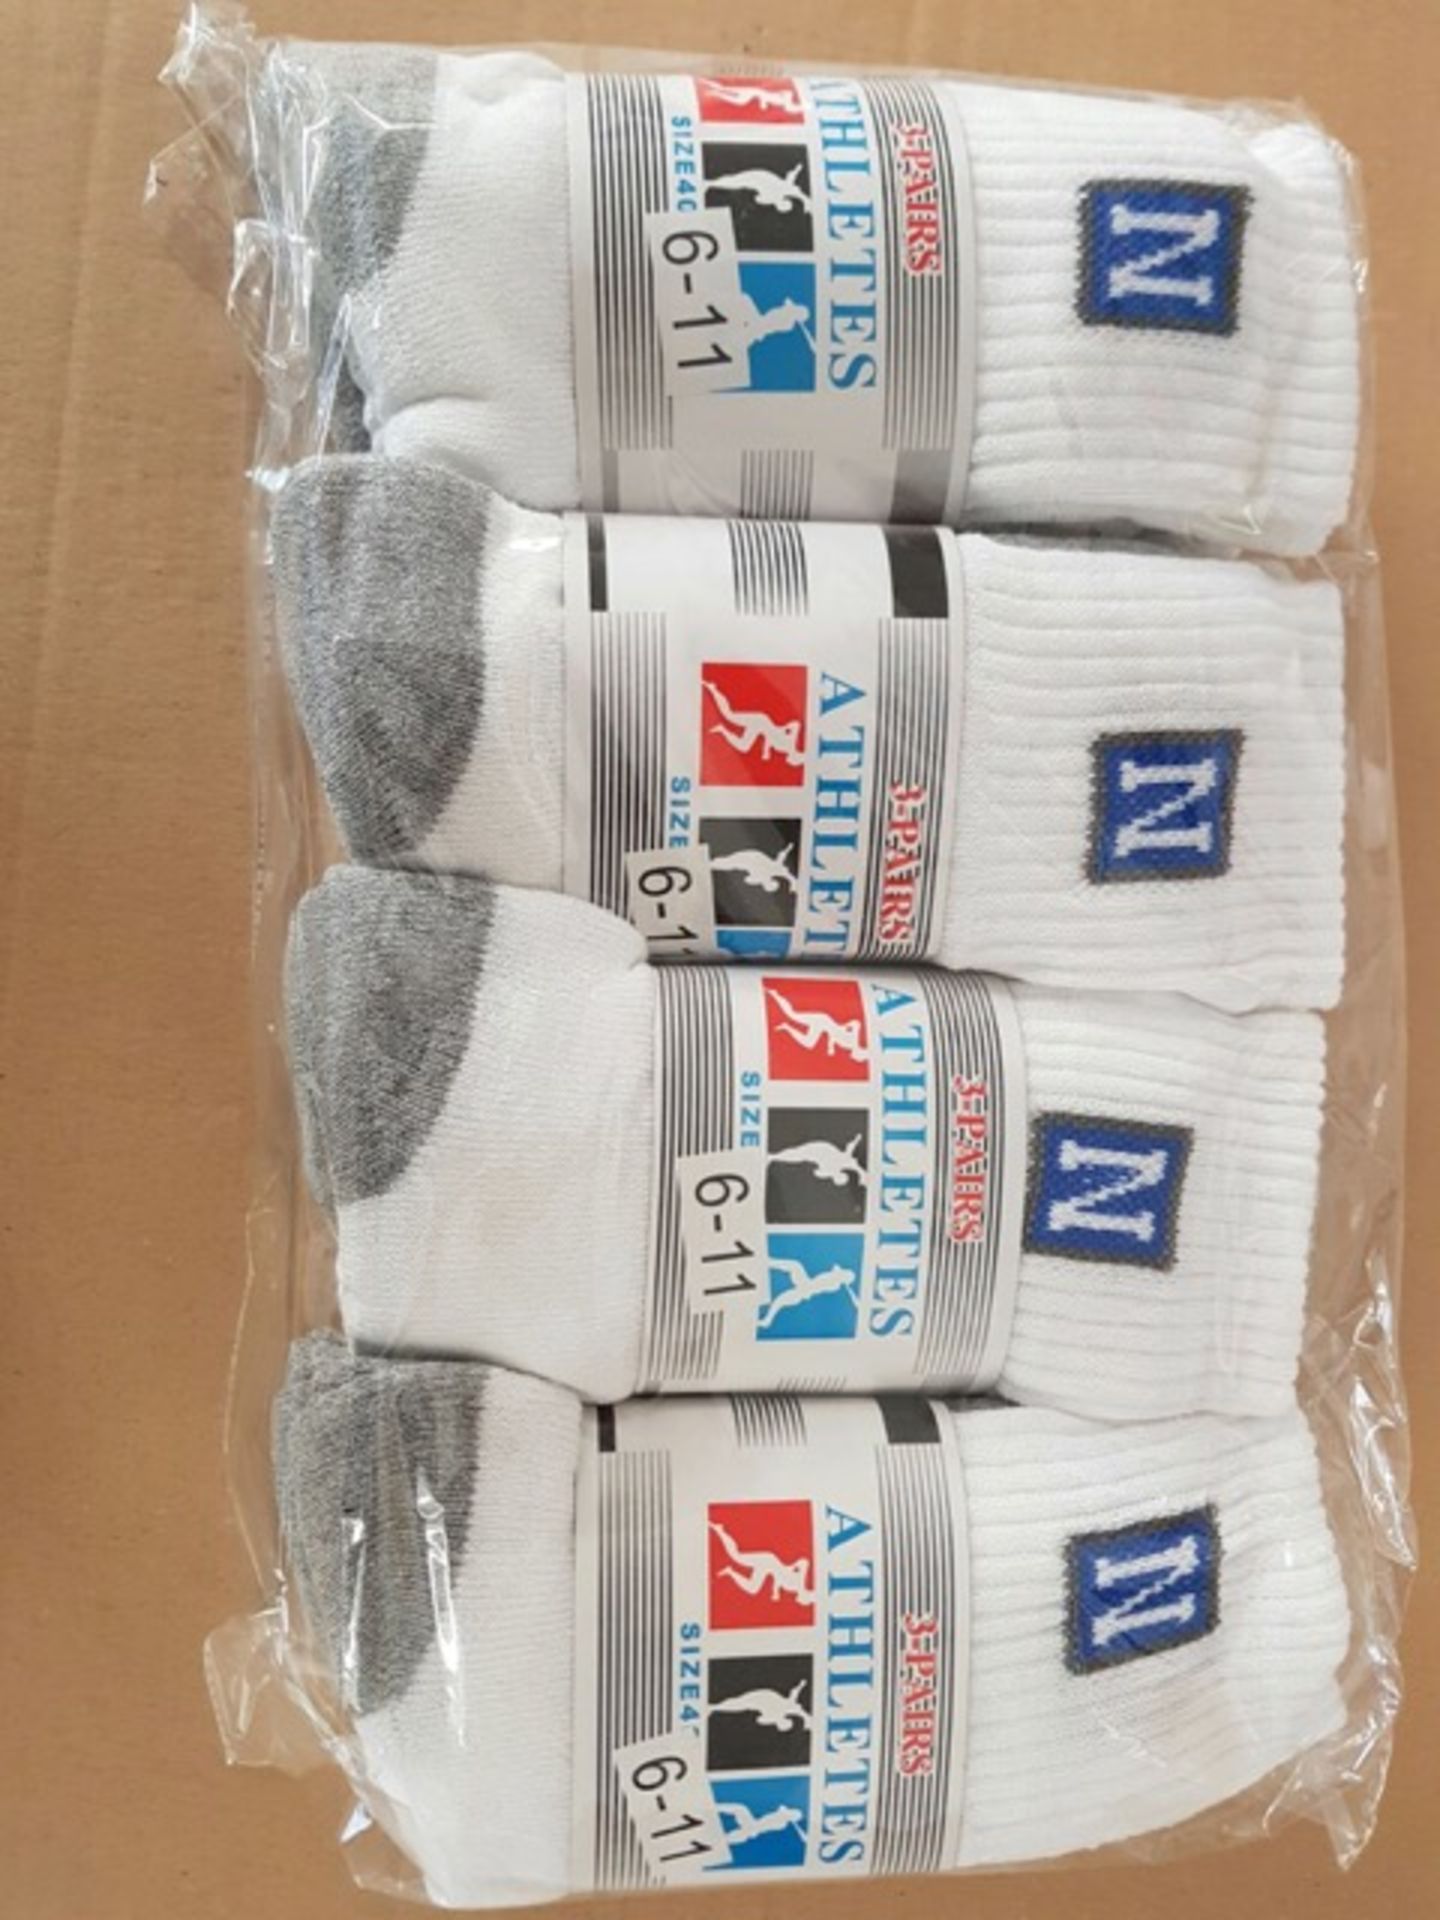 40 x Brand New Packs of 3 High Quality Sports Socks. Size Adult 6-11. Price marked at £5.99 per pack - Image 3 of 3